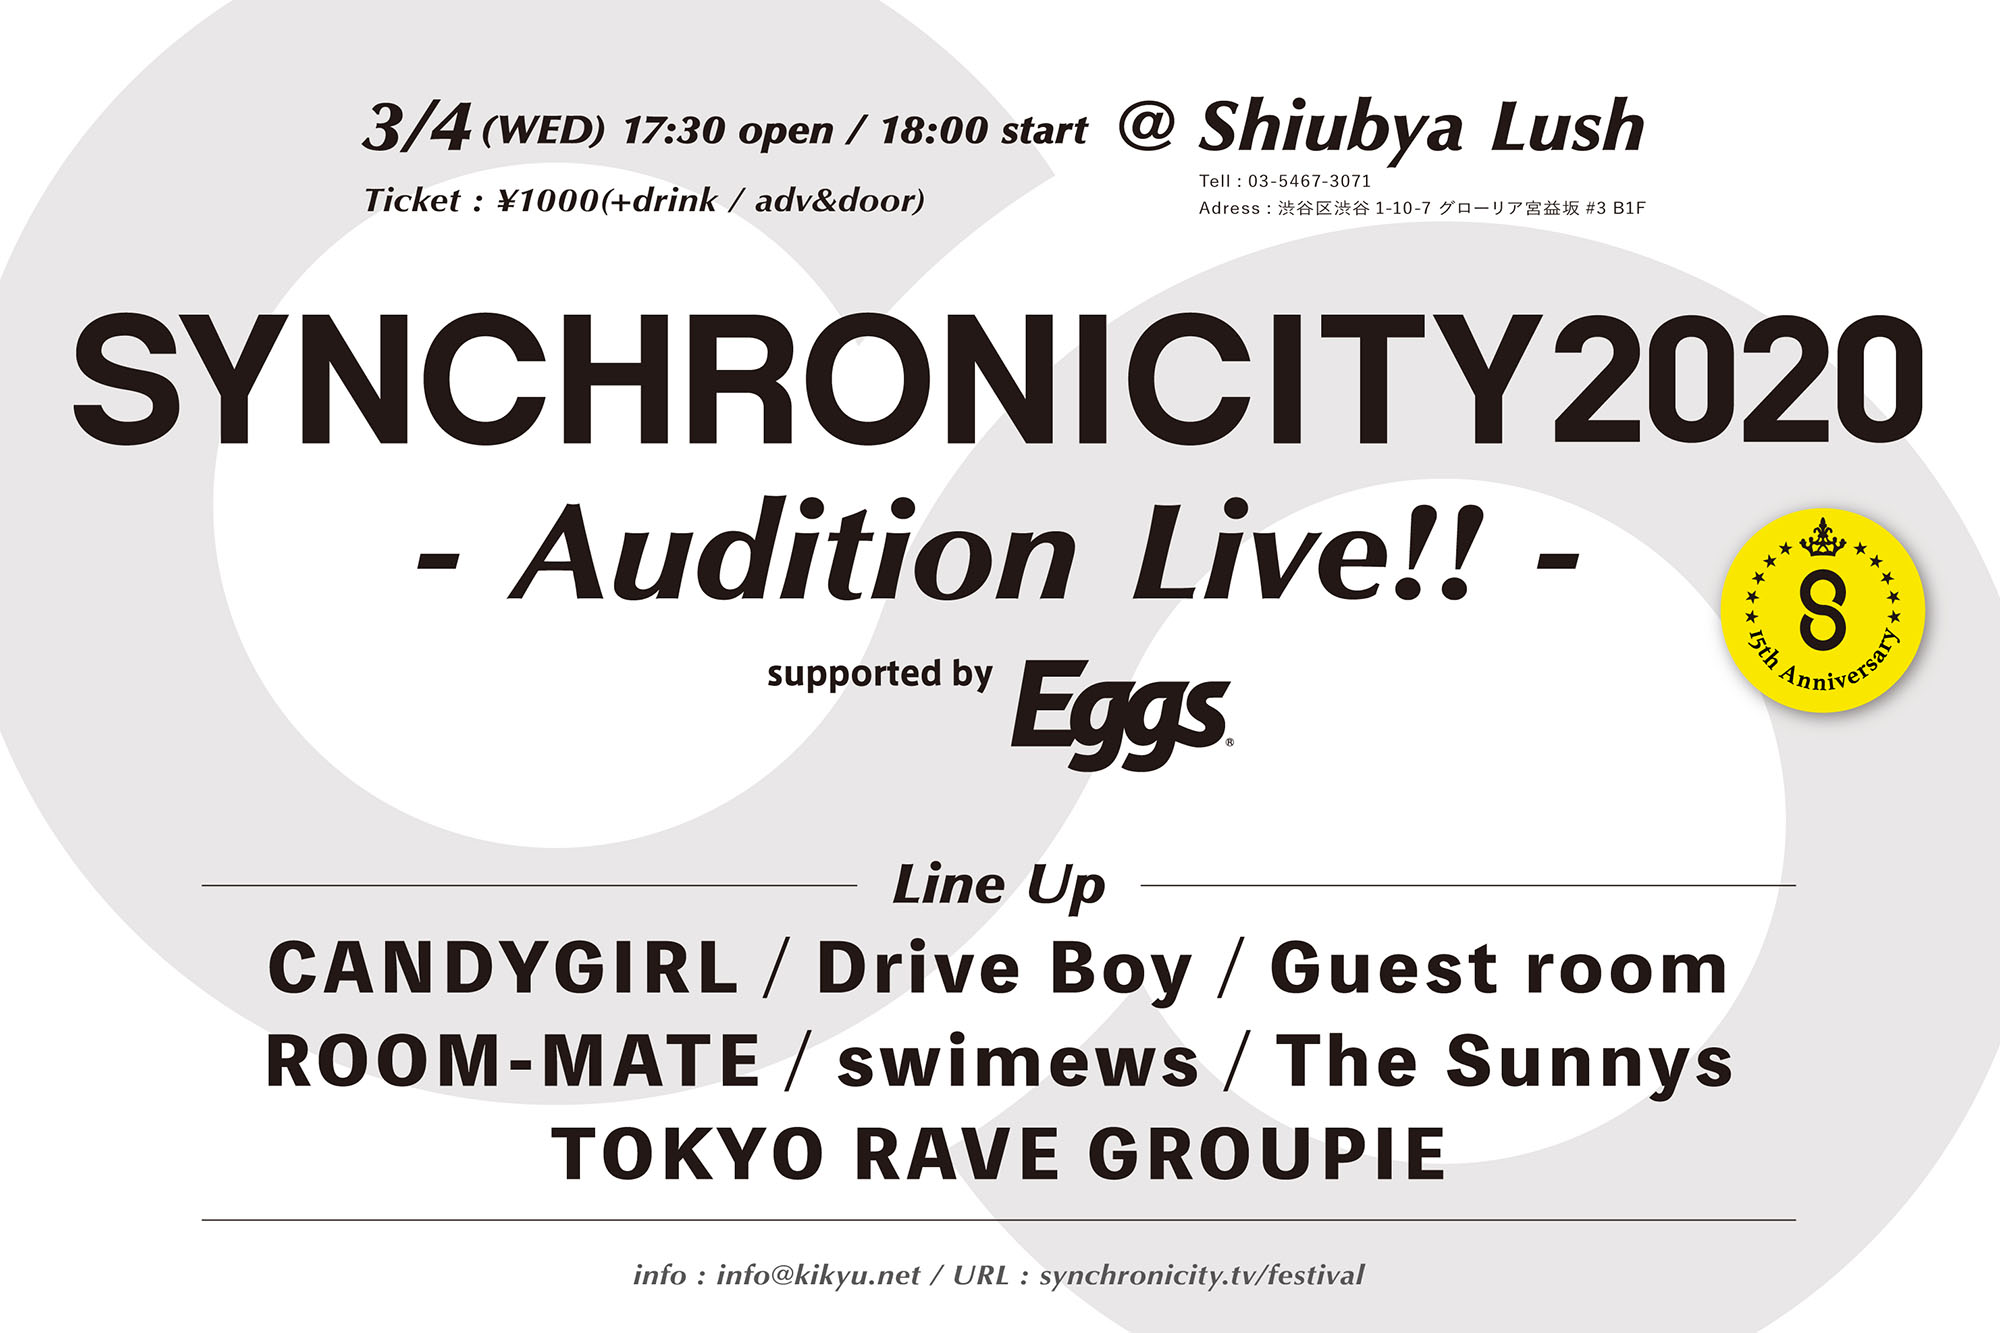 synchro18_music_force_flyer